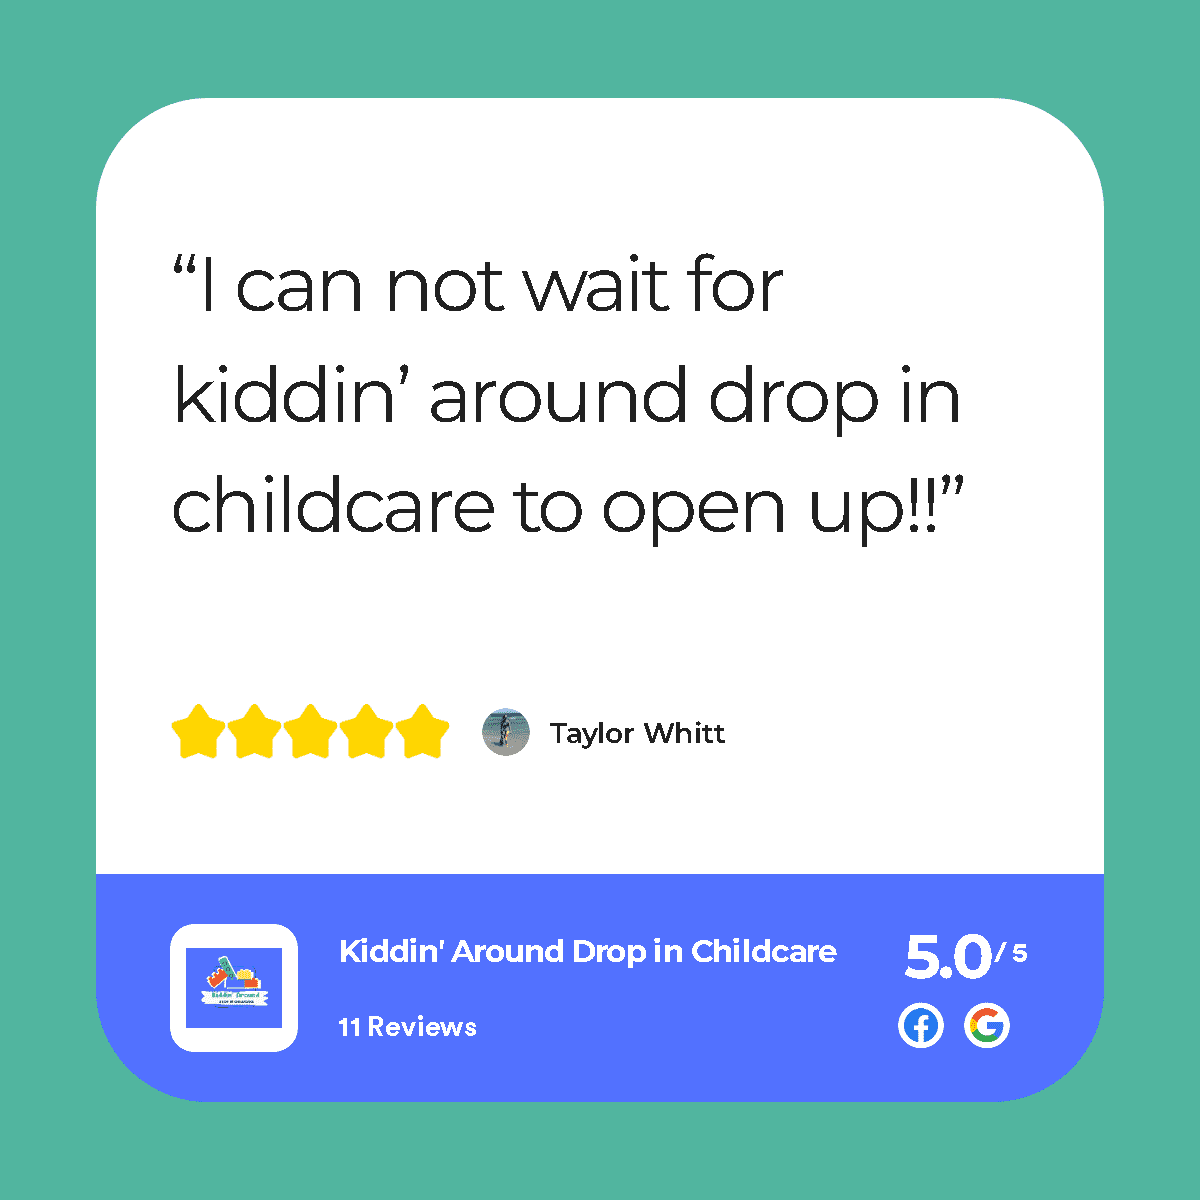 I can not wait for kiddin’ around drop in childcare to open up!!